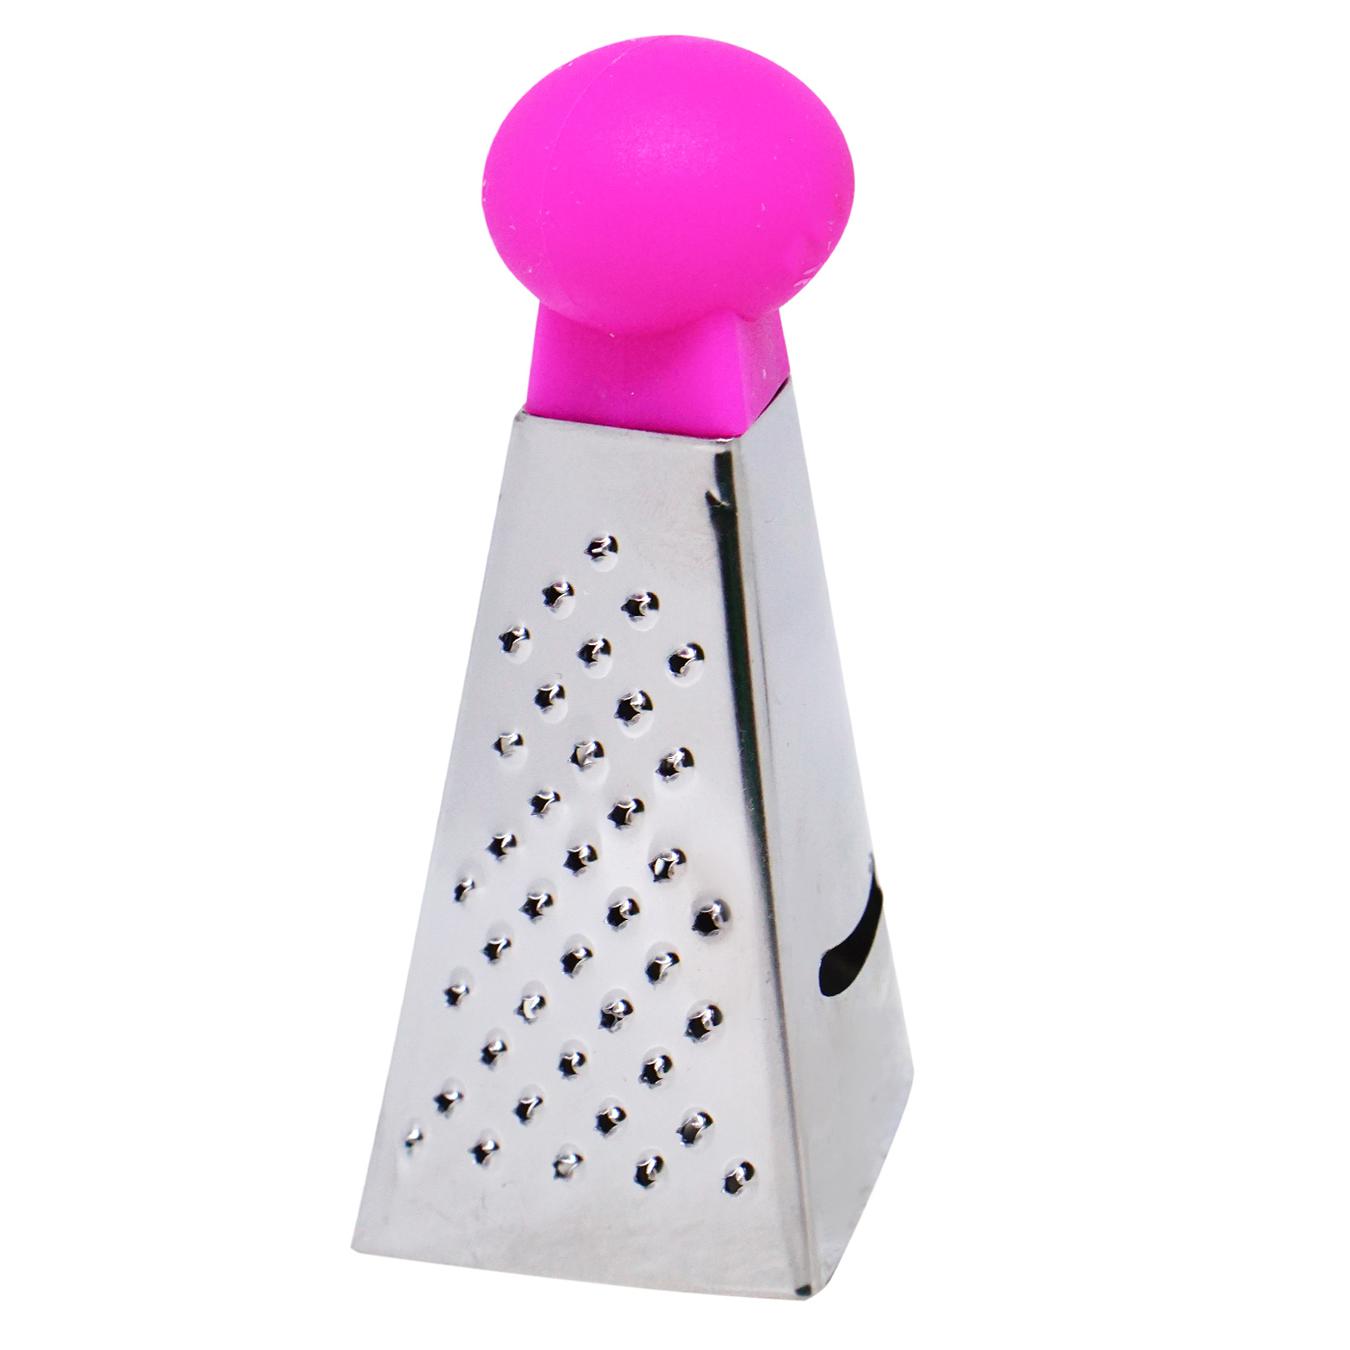 ITG mini grater with a plastic magnet